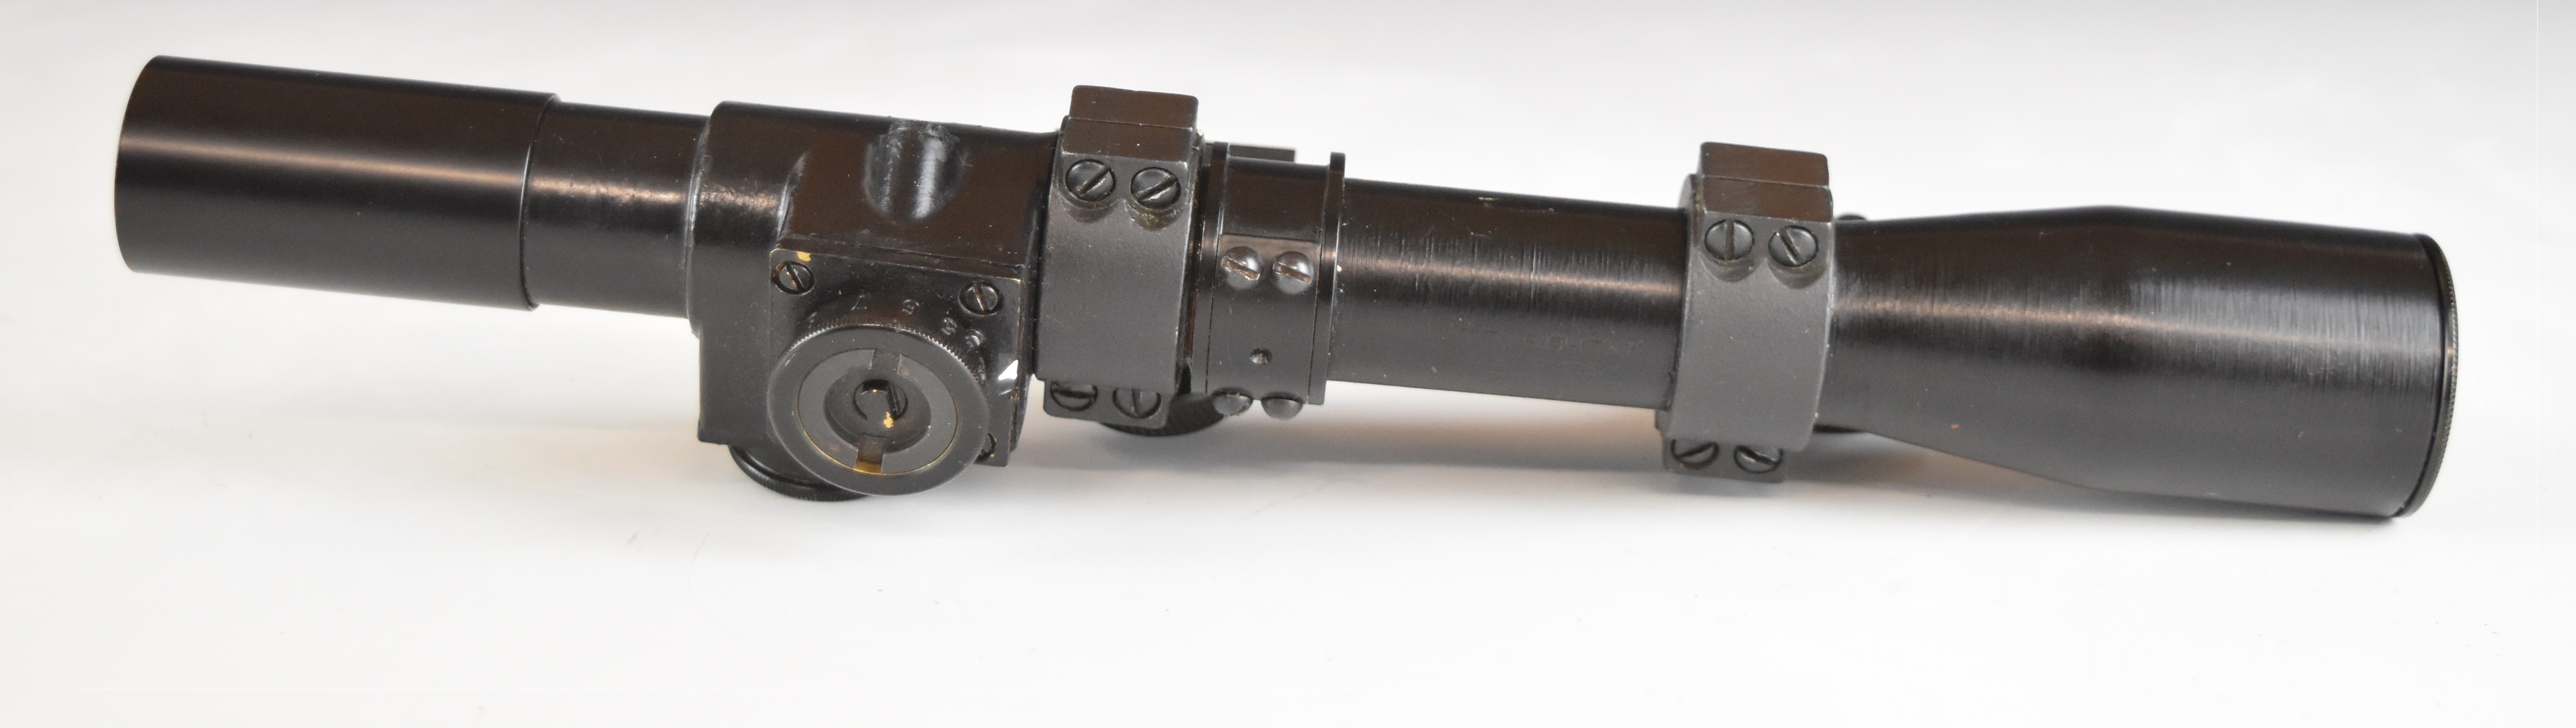 Lee Enfield No 32 Mk I adjustable sniper rifle scope with mount and fixings, stamped 'Tel.